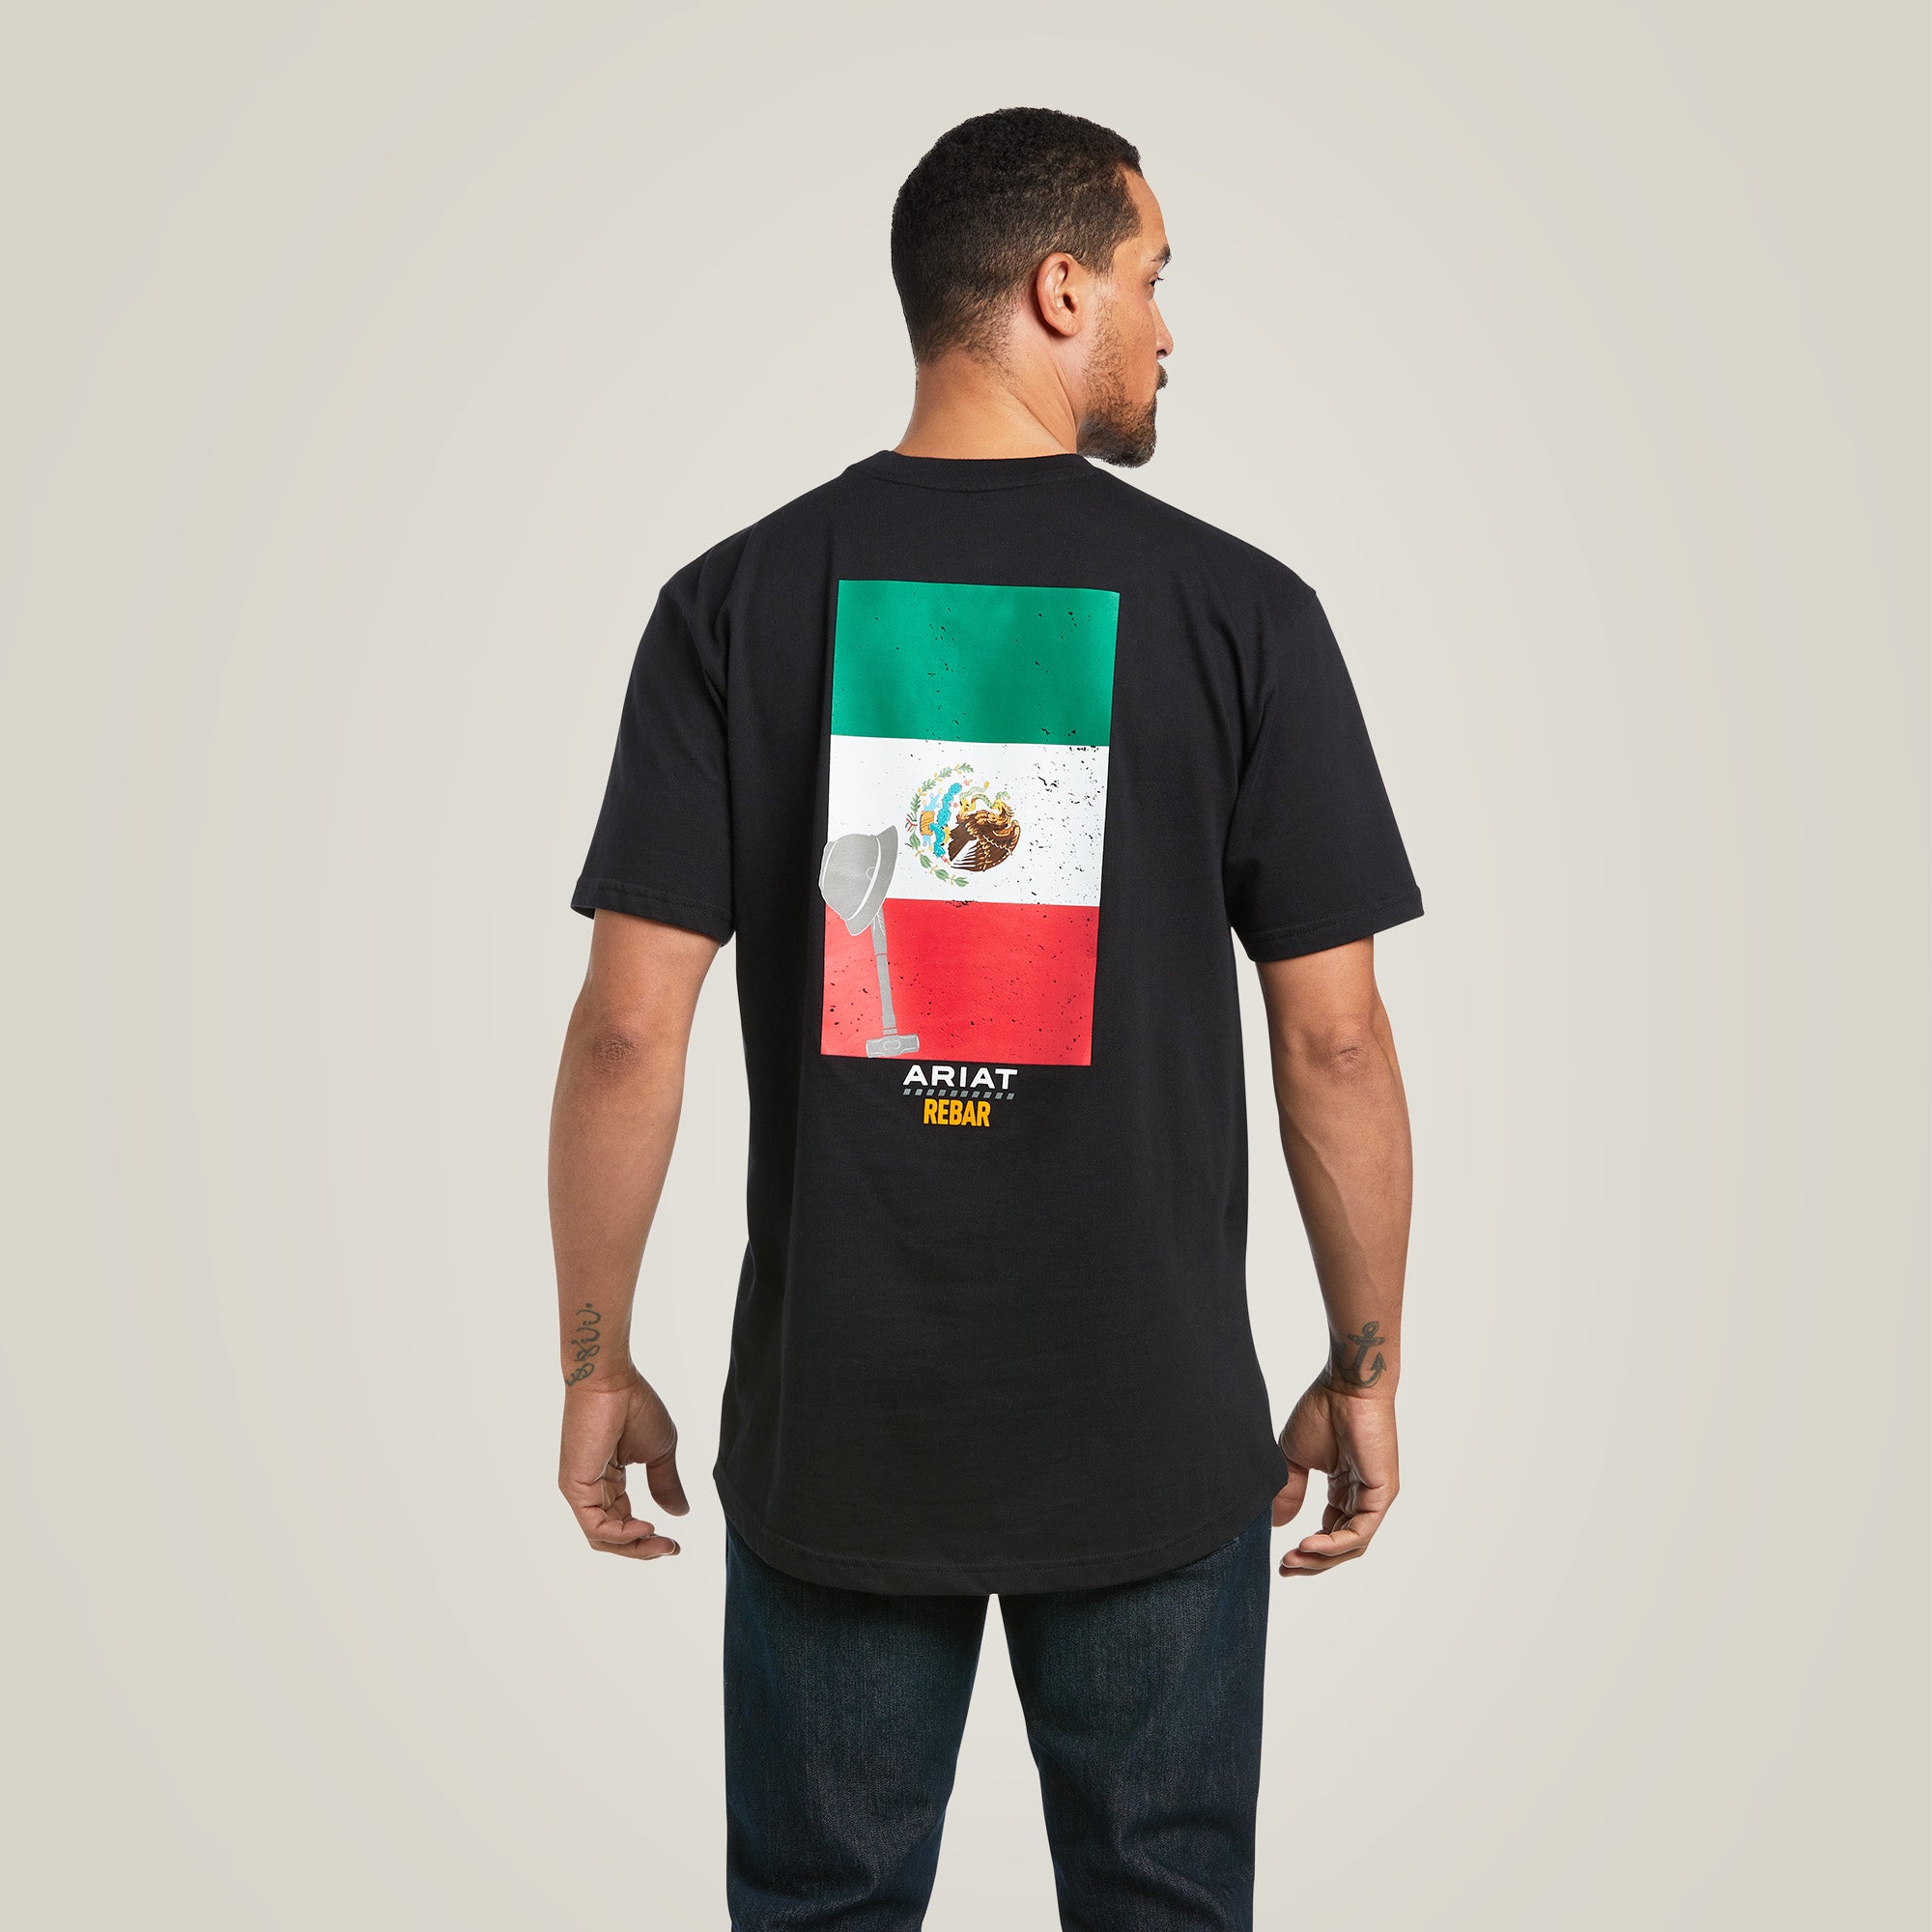 Ariat Men's Rebar Cotton Strong Mexican Pride Graphic T-Shirt, Black